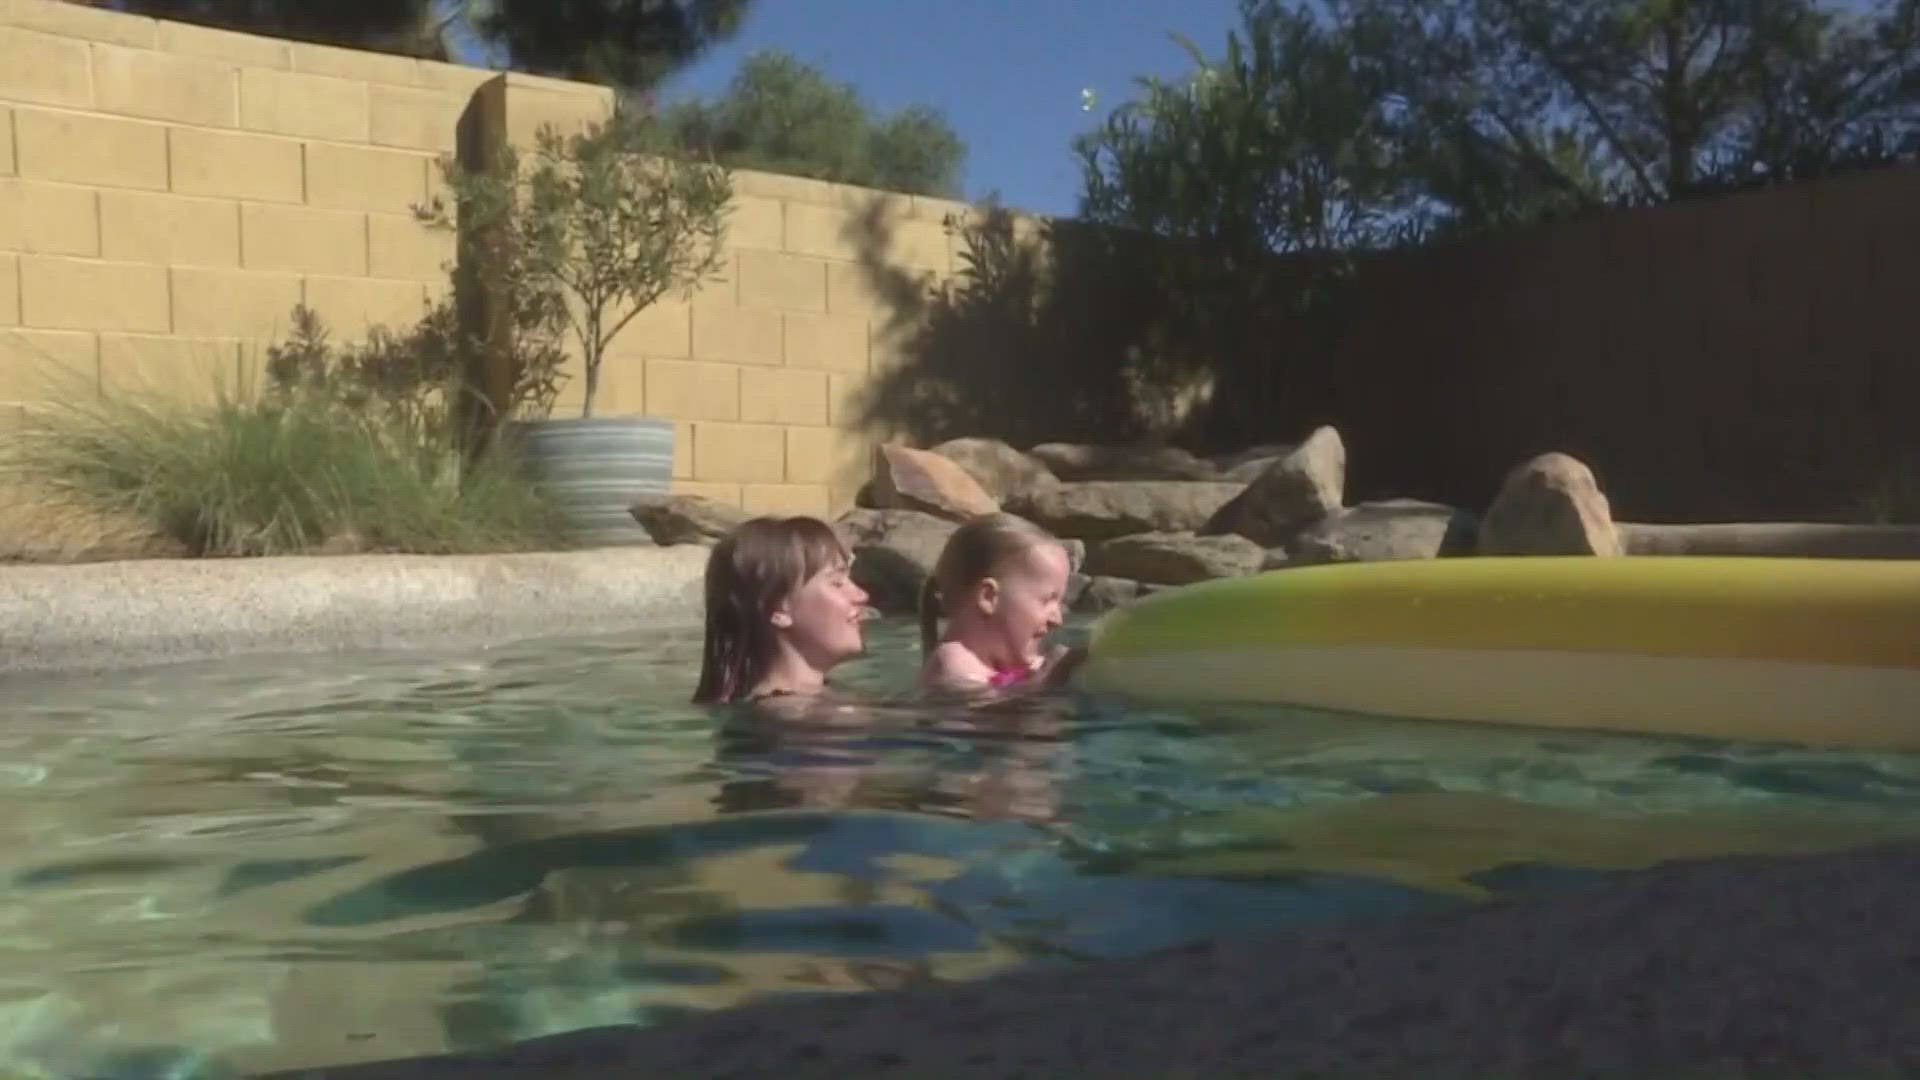 With temps rising, many are headed to pools to cool off. Experts offer some advice to help you stay safe around water.